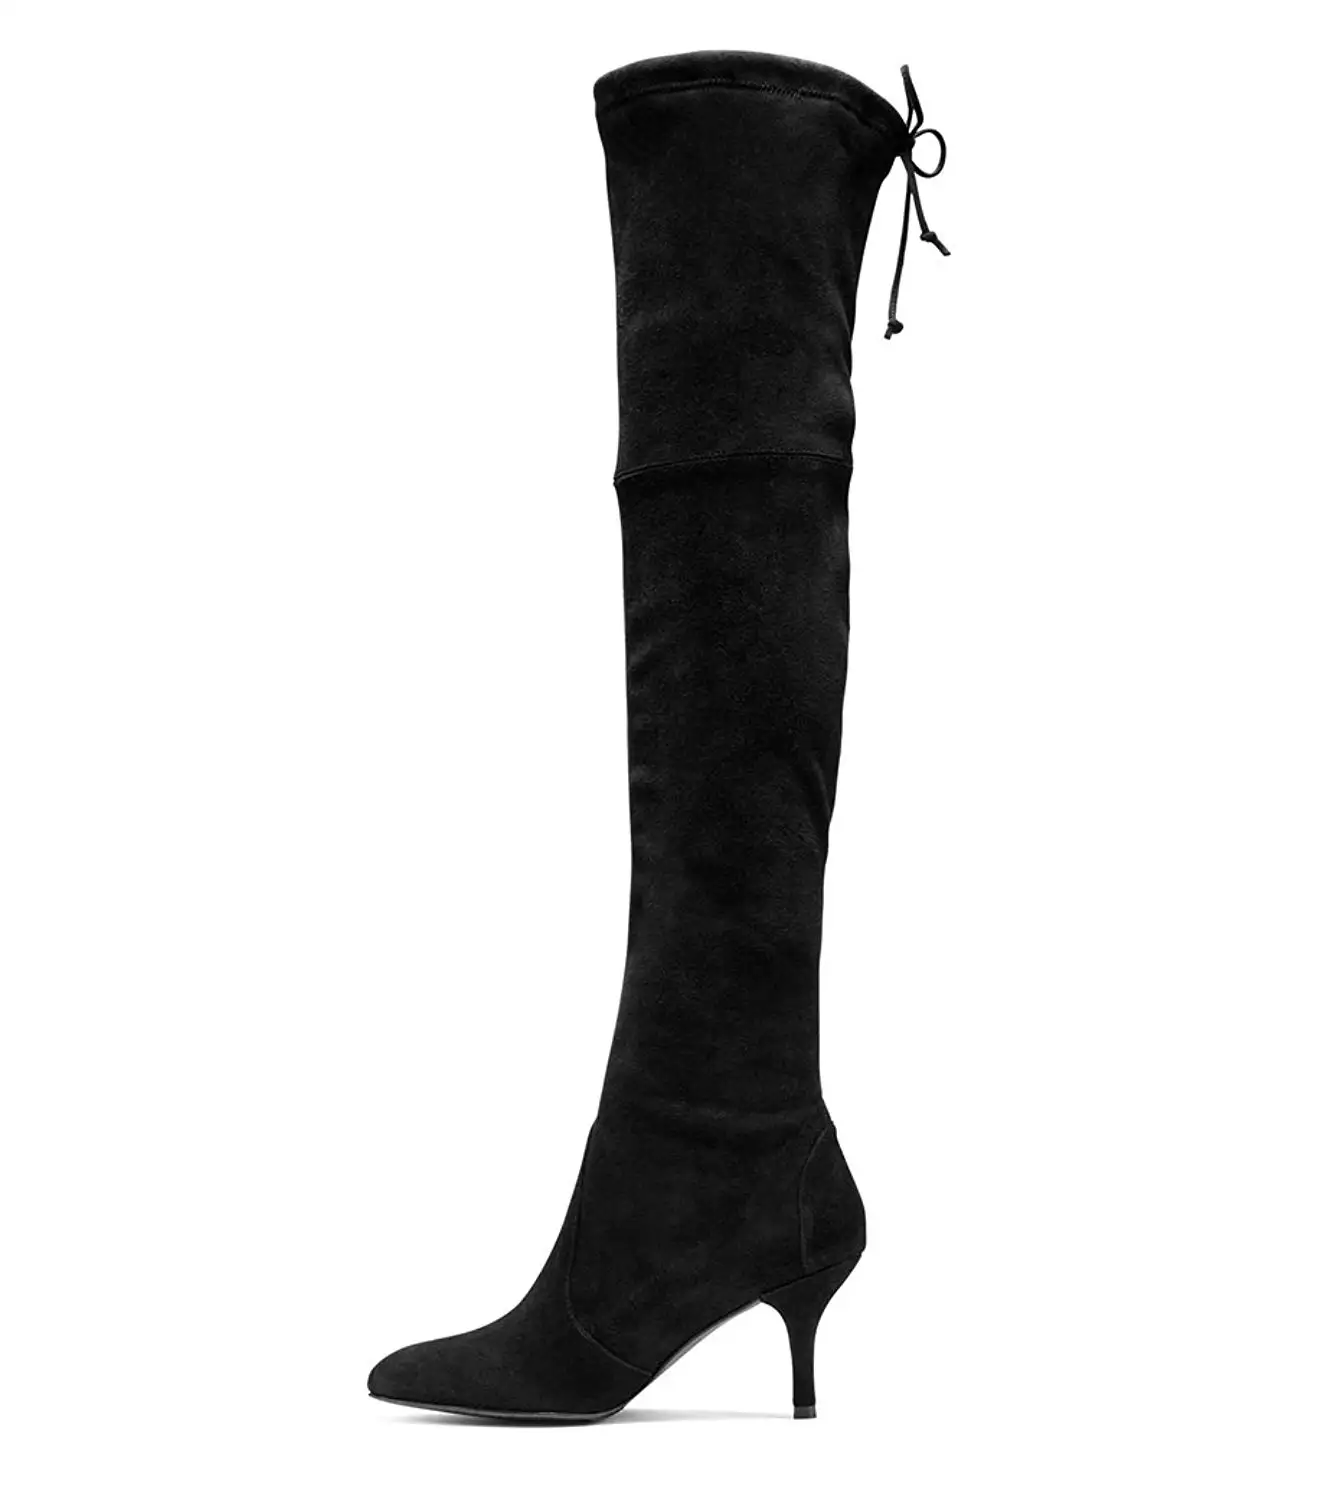 affordable thigh high boots